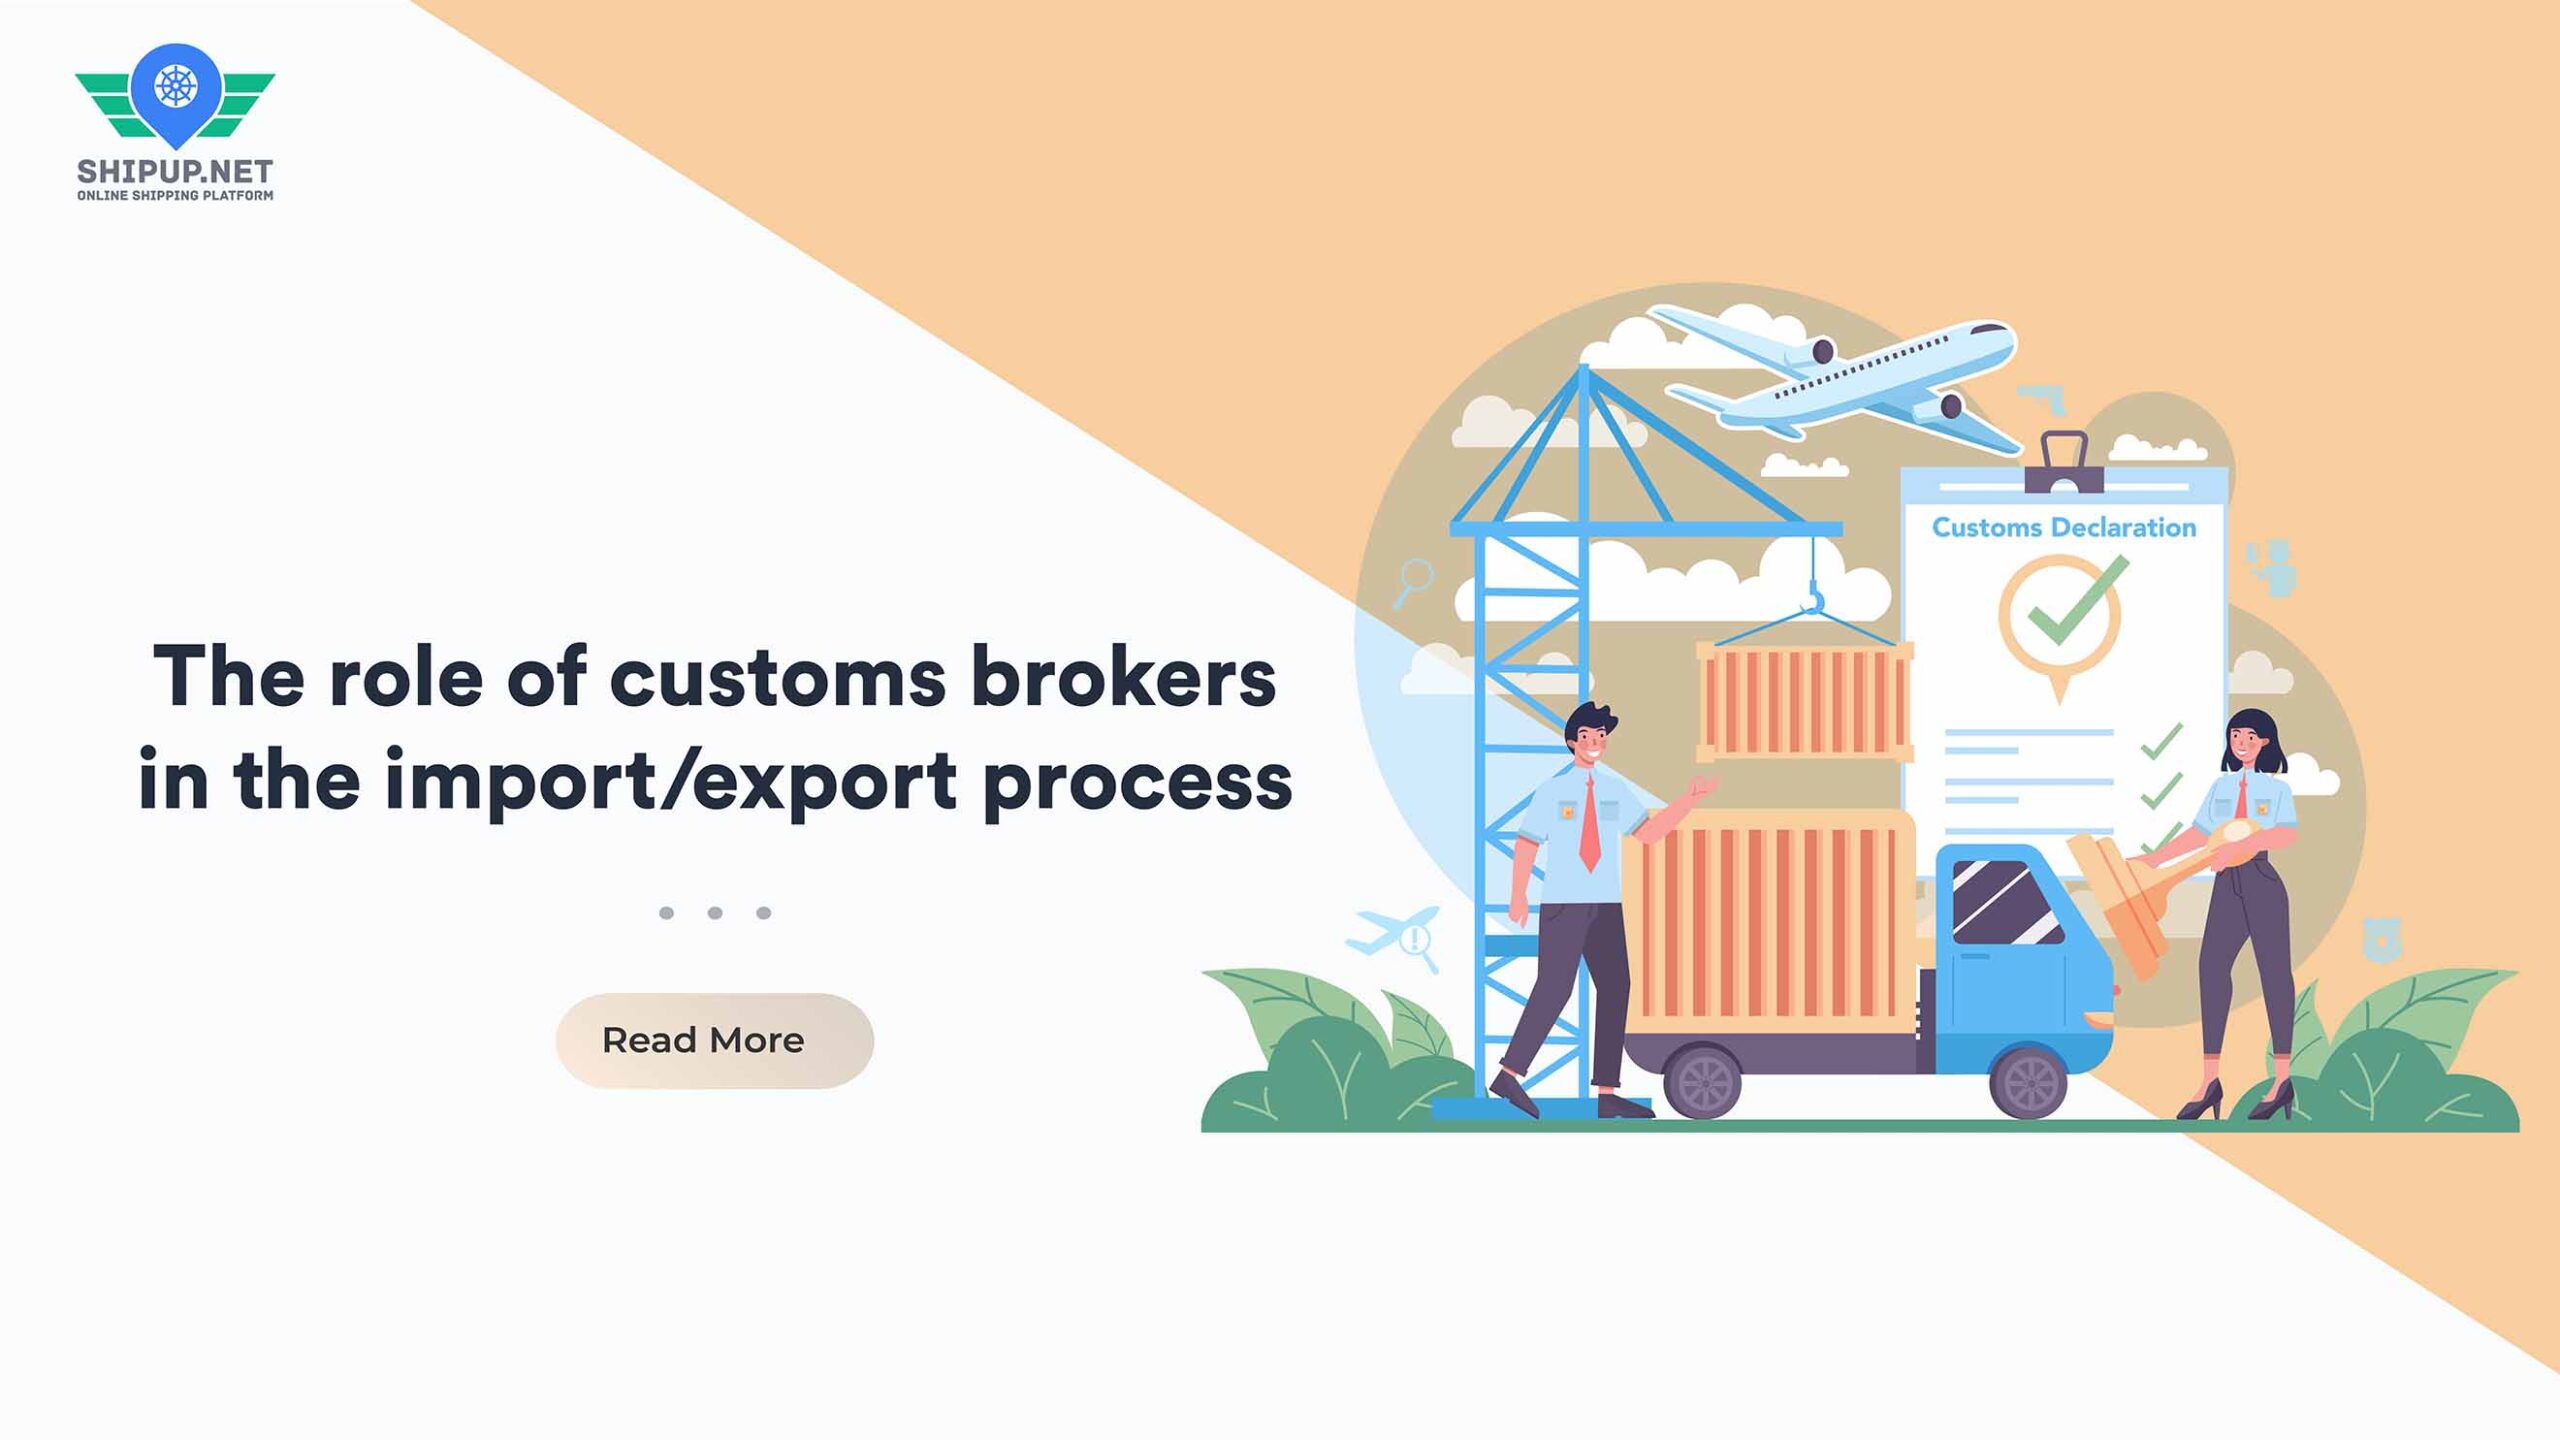 The role of customs brokers in the import export process